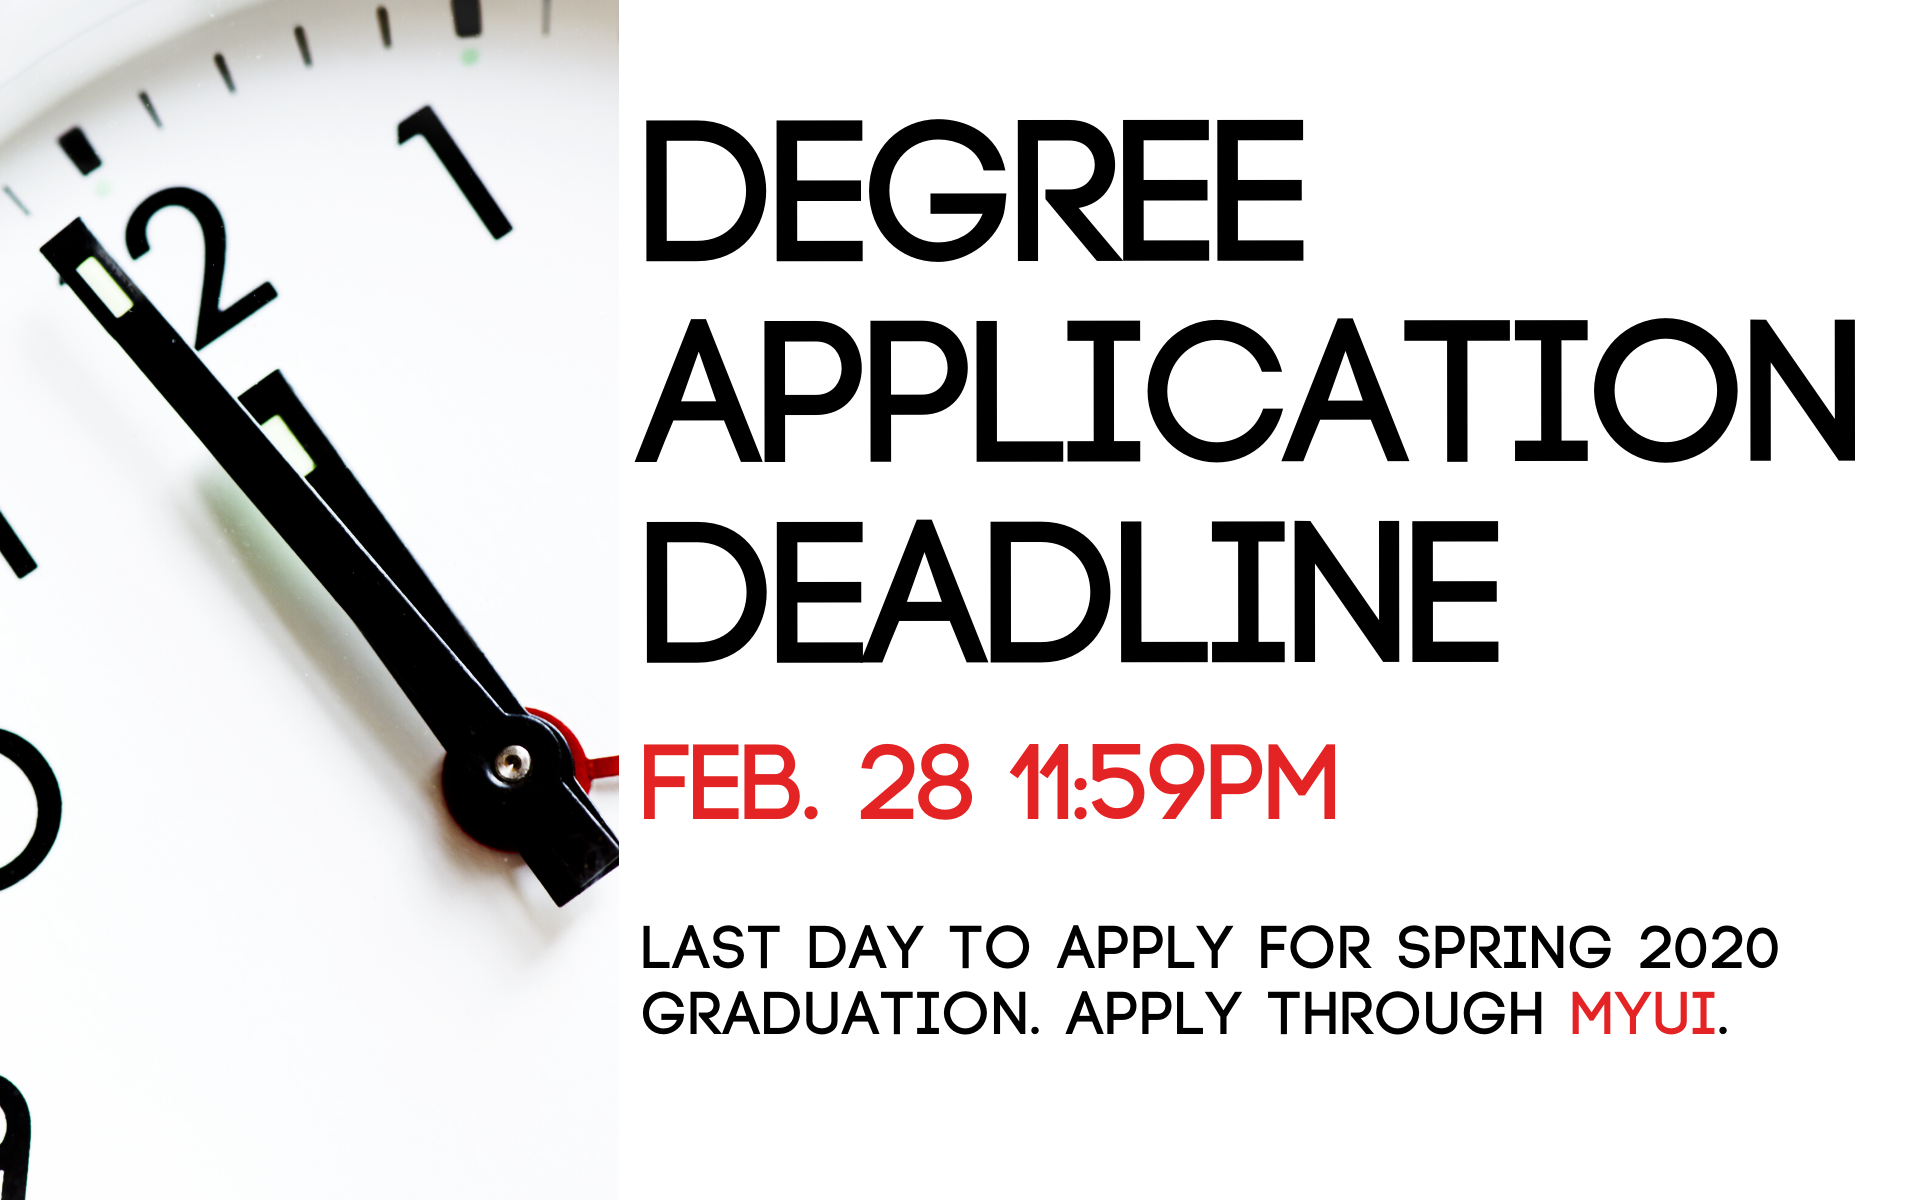 Degree Application Deadline is February 28, 11:59PM.  Last day to apply for spring 2020 graduation.  Apply through MyUI.  